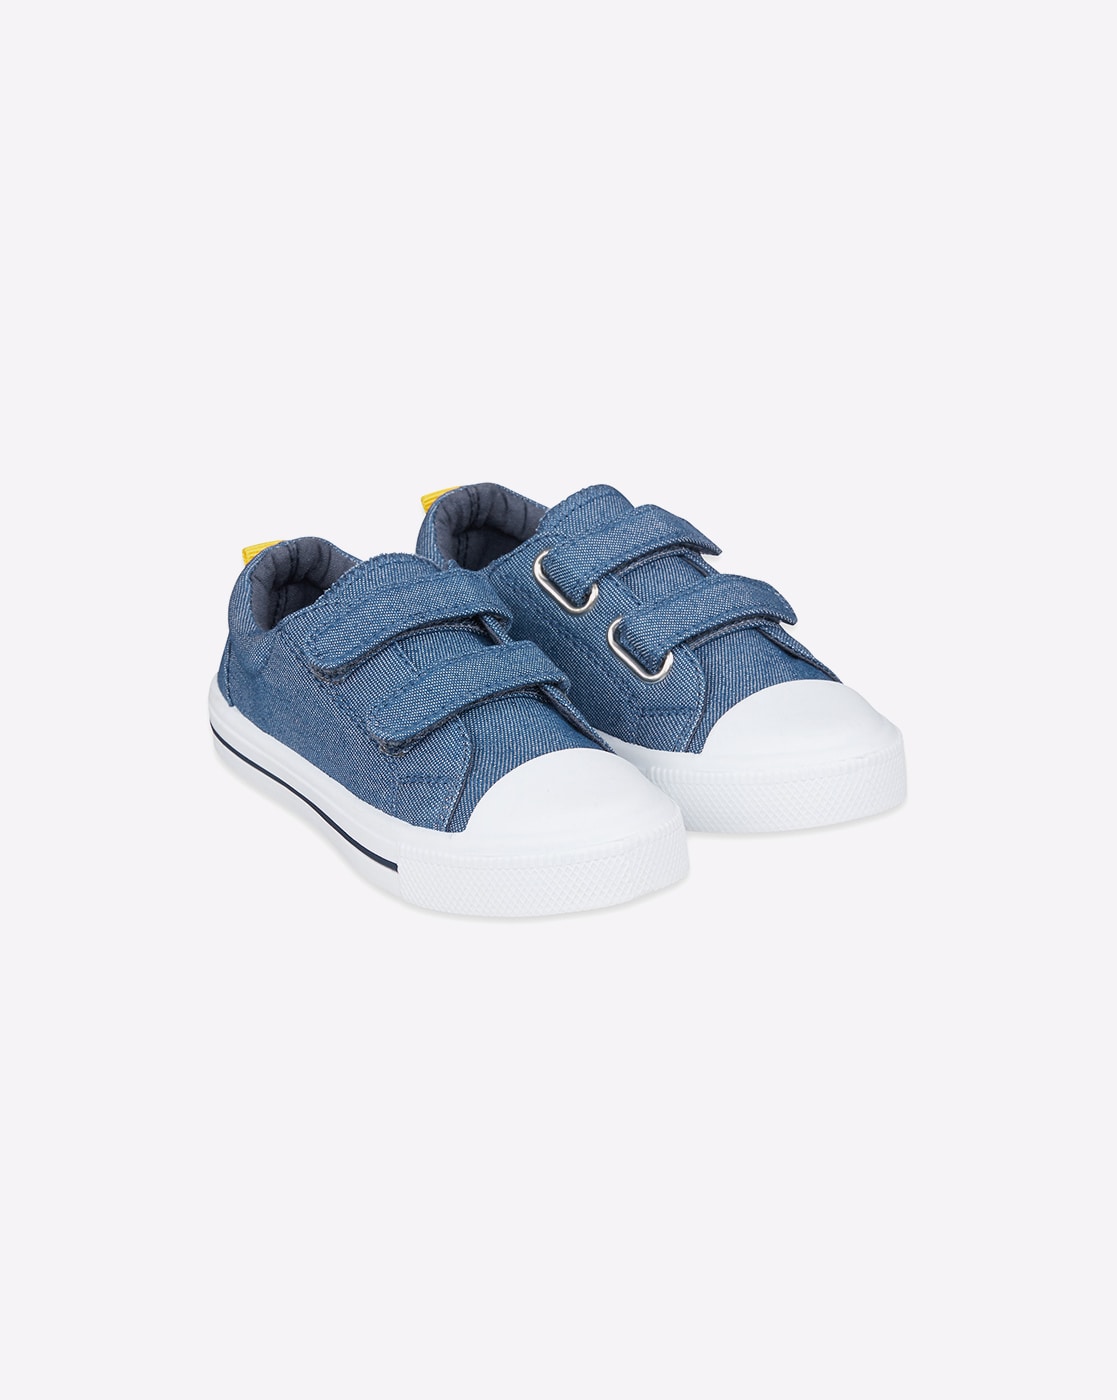 Mens Casual Denim Dockers Casual Shoes Comfortable Adult Footwear Loafers, Canvas  Sneakers, And Plus Size Options Style 221007 From Jiao004, $17.65 |  DHgate.Com